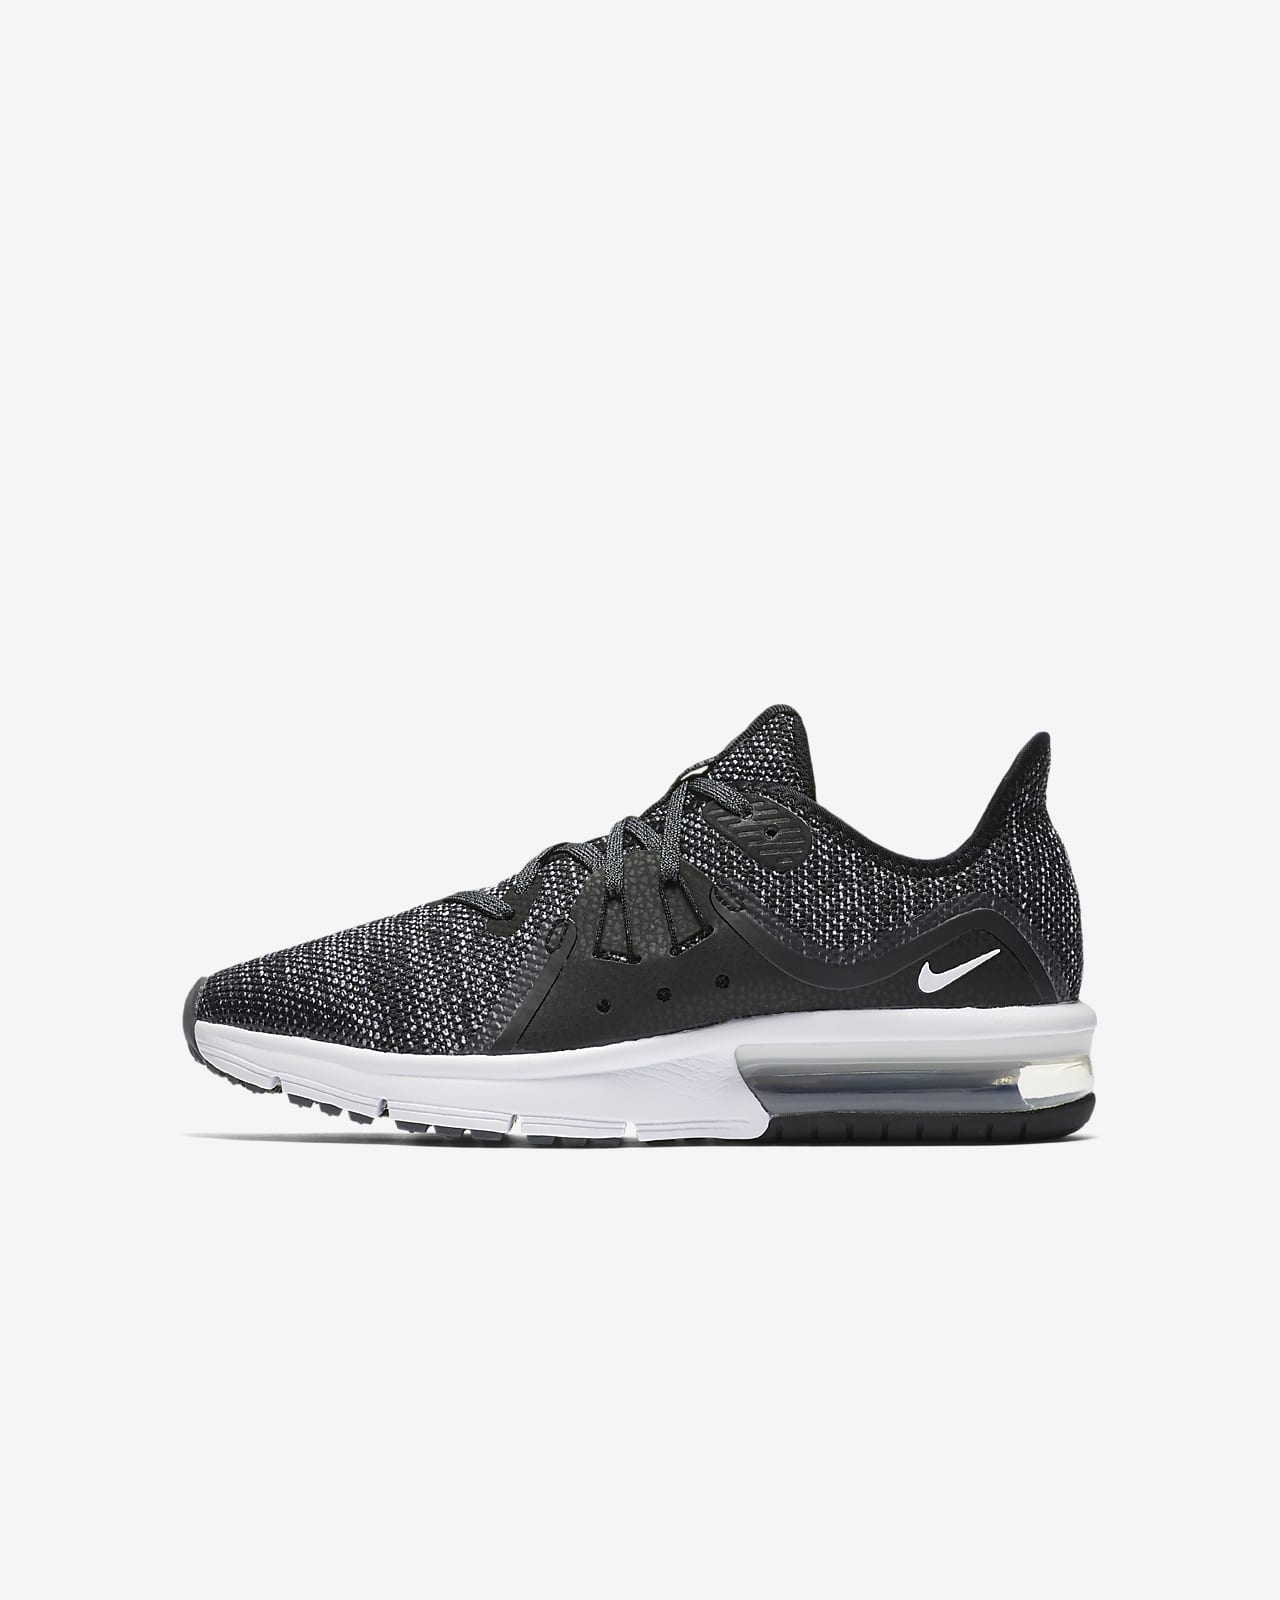 nike women's air max sequent 3 running shoe